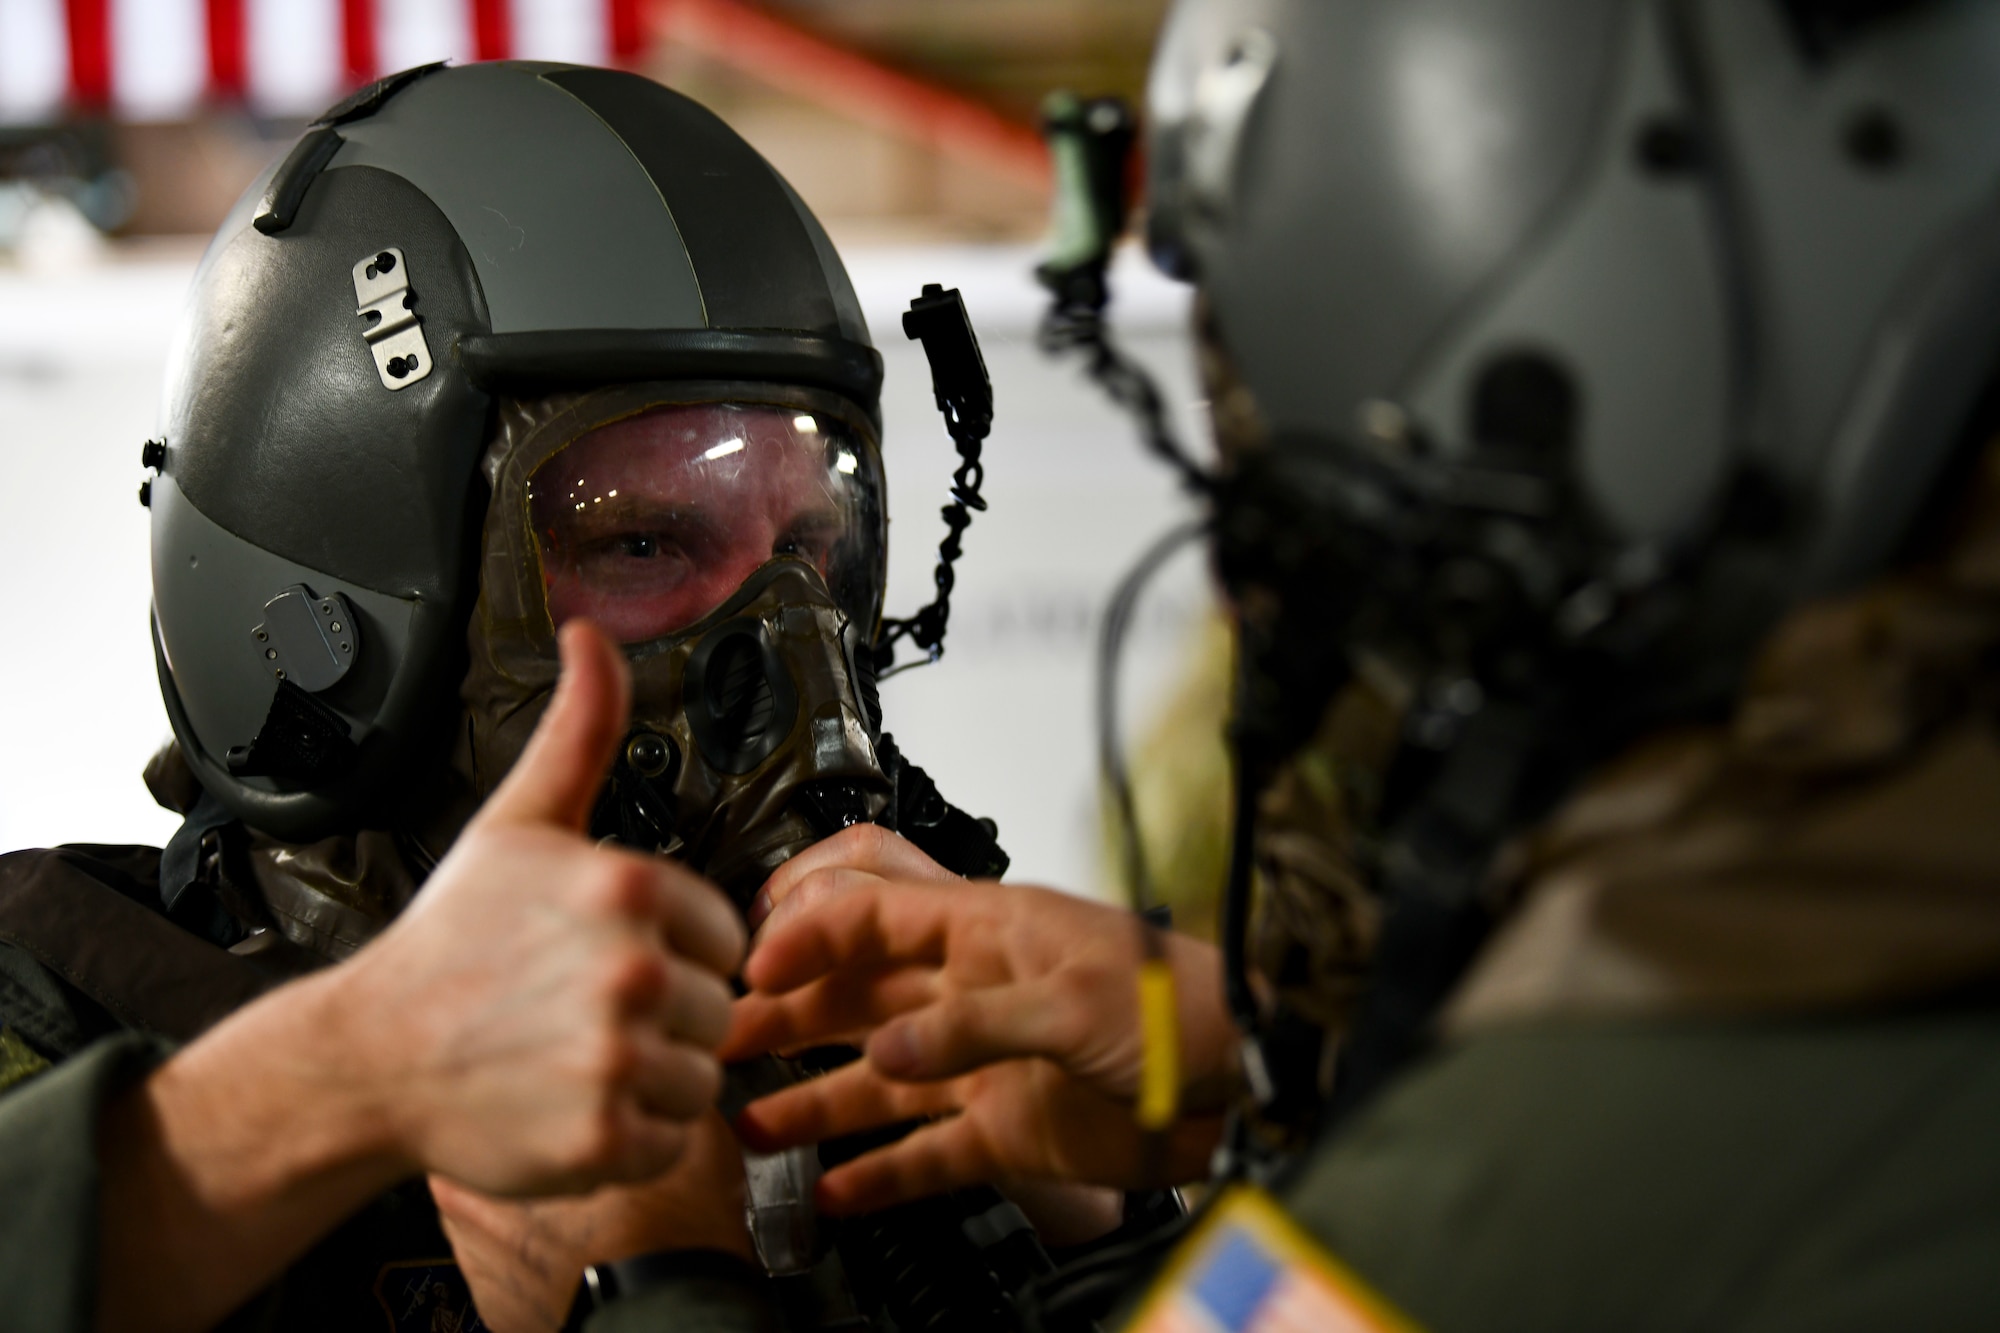 Master Sgt. Mitchell Baker, a loadmaster assigned to the 183rd Airlift Squadron, receives a buddy check as he dons his aircrew eye and respiratory protection system during a large-scale readiness exercise in Jackson, Mississippi, Jan. 28, 2022. The 172nd Airlift Wing conducted a base-wide LRE to test the unit's ability to operate in a contested environment. (U.S. Air National Guard photo by 1st Lt. Kiara Spann)